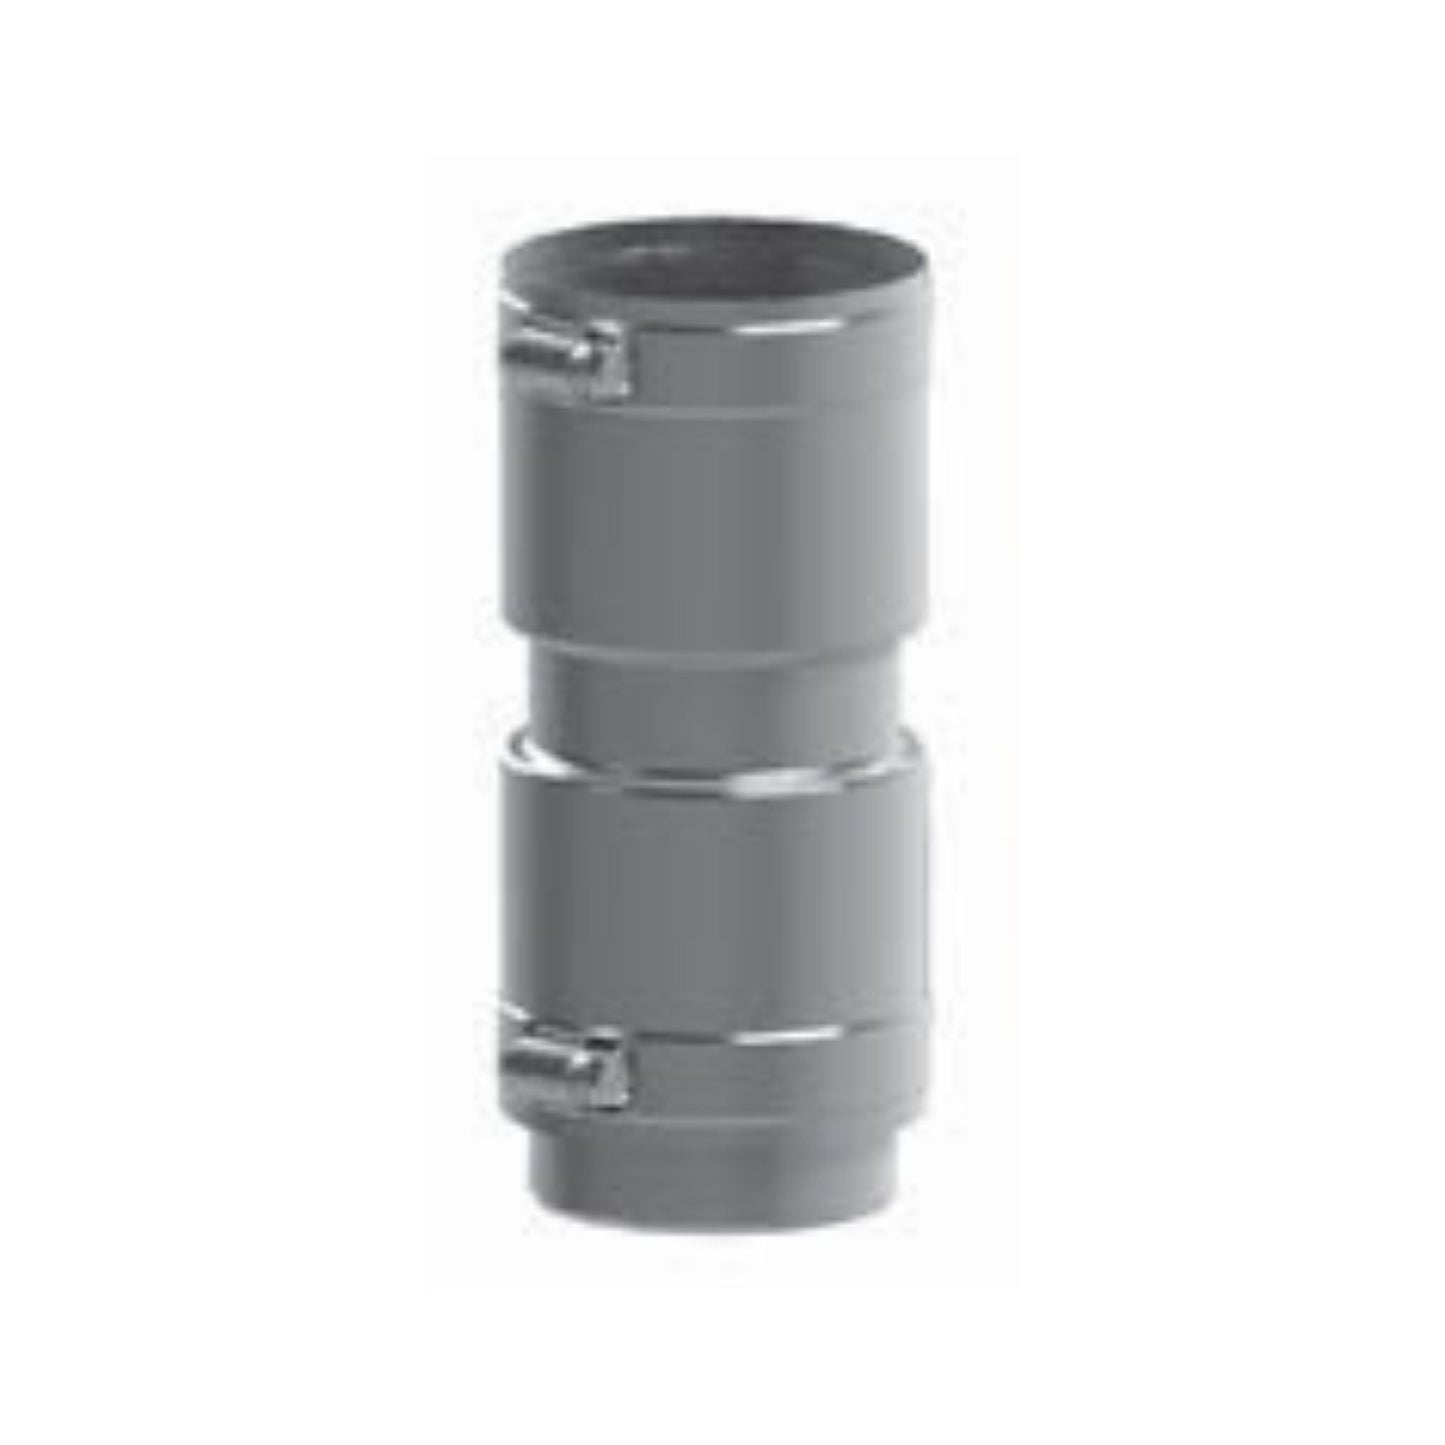 DuraVent FasNSeal Flex 8" 29-4C Stainless Steel Coupler